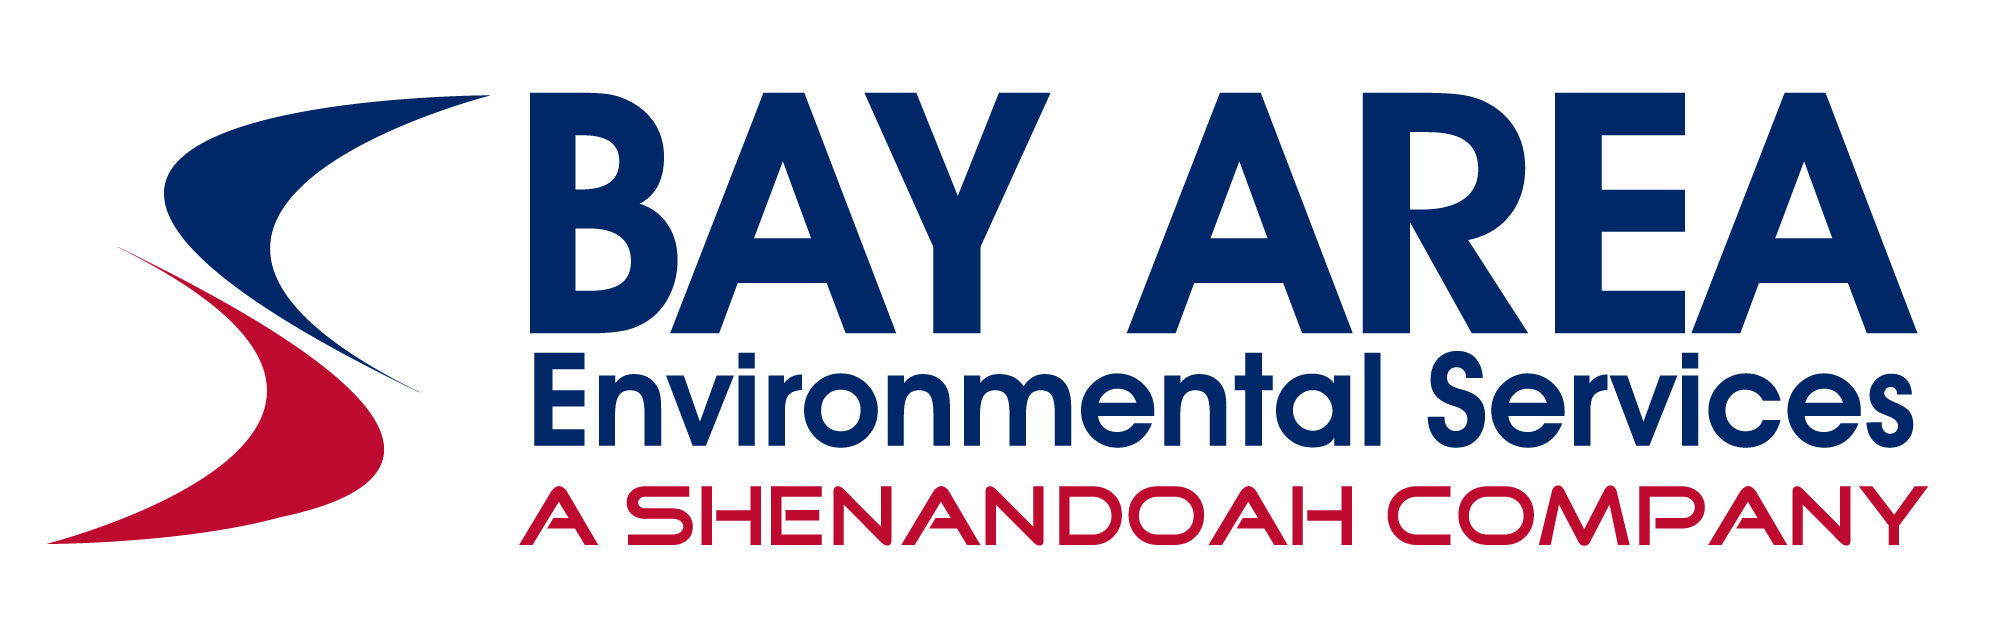 SHENANDOAH INDUSTRIAL SERVICES COMPLETES ACQUISITION OF BAY AREA ENVIRONMENTAL SERVICES